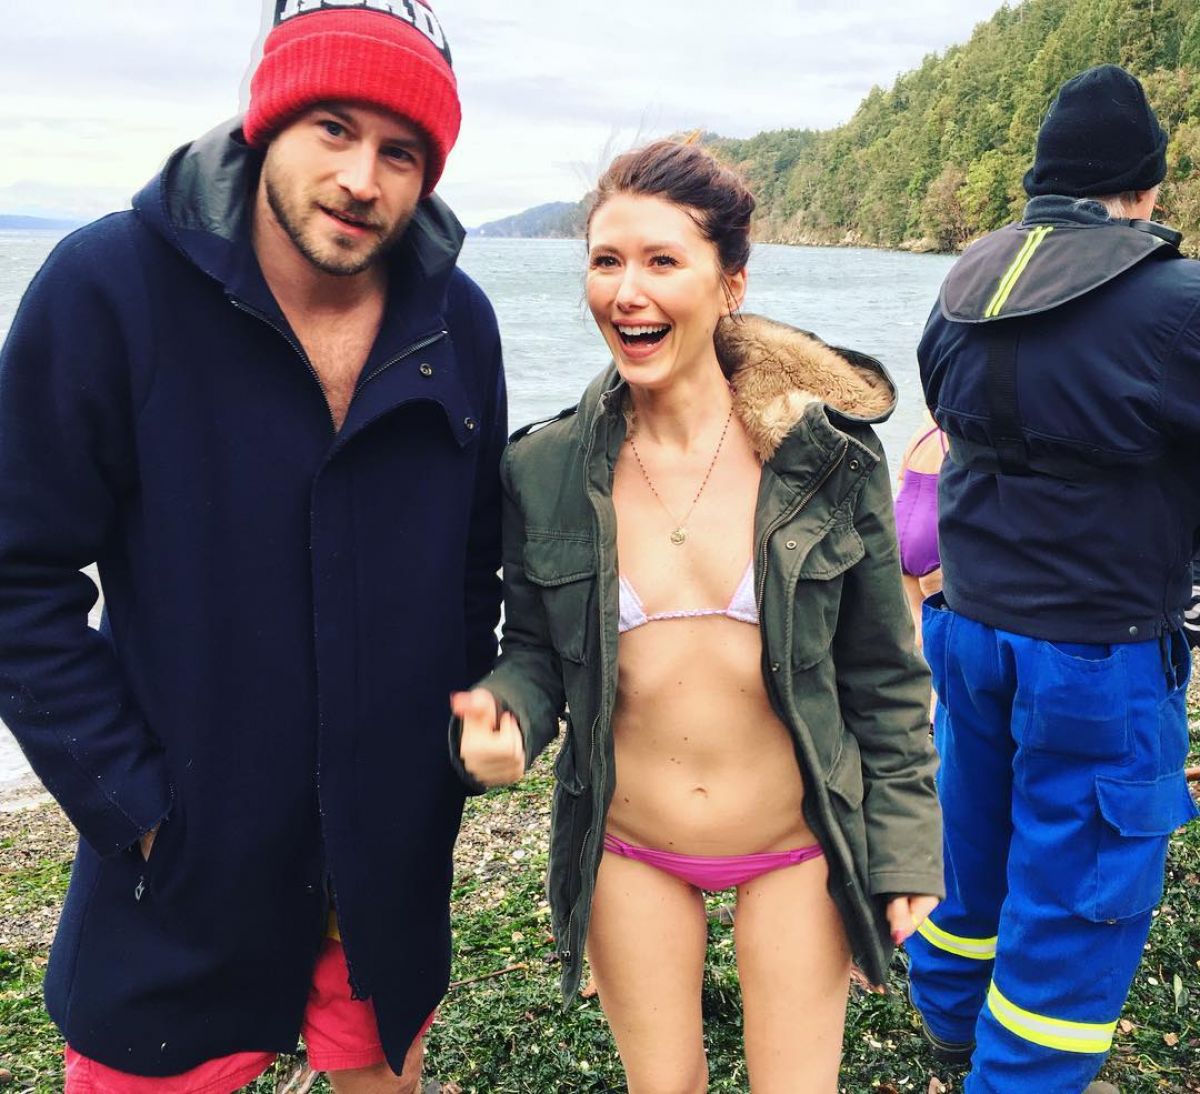 JEWEL STAITE at New Year’s Swim, Instagram Picture 01/01/201